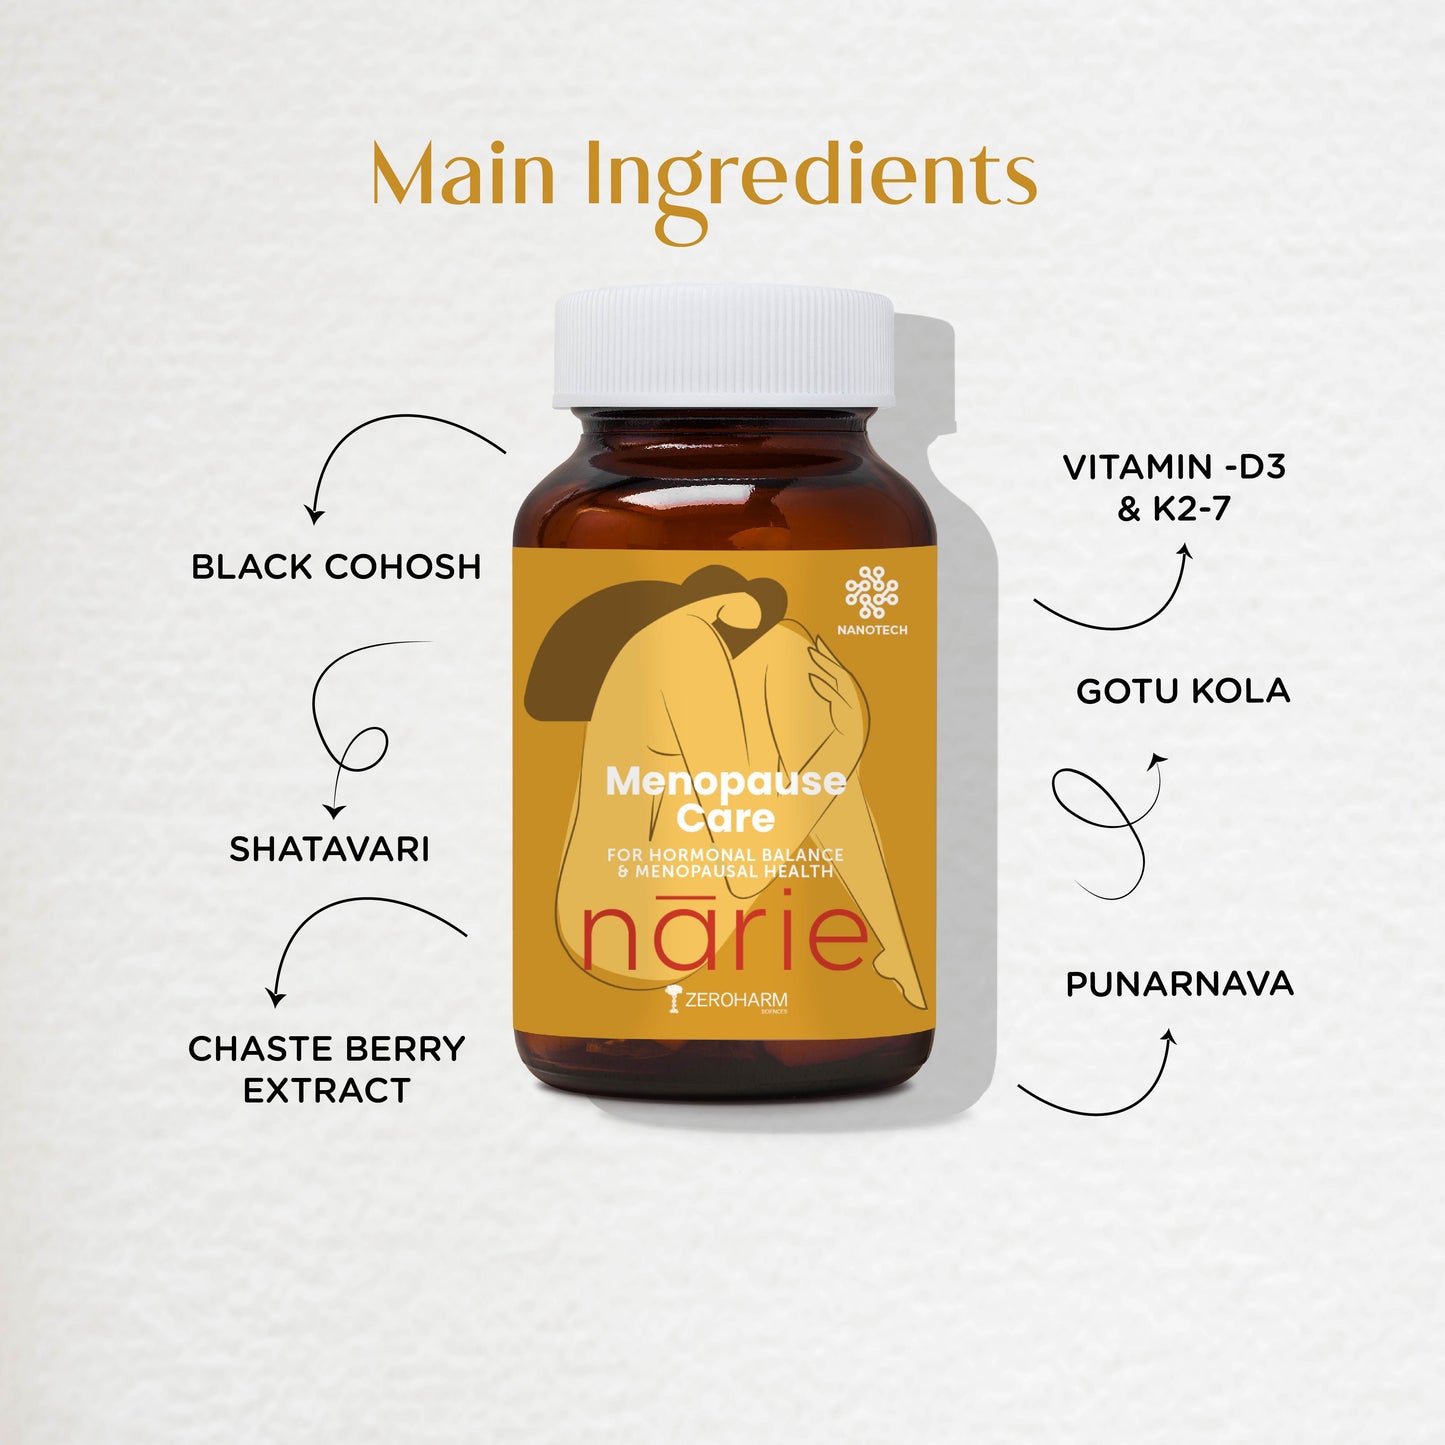 Narie Menopause Care Supplements